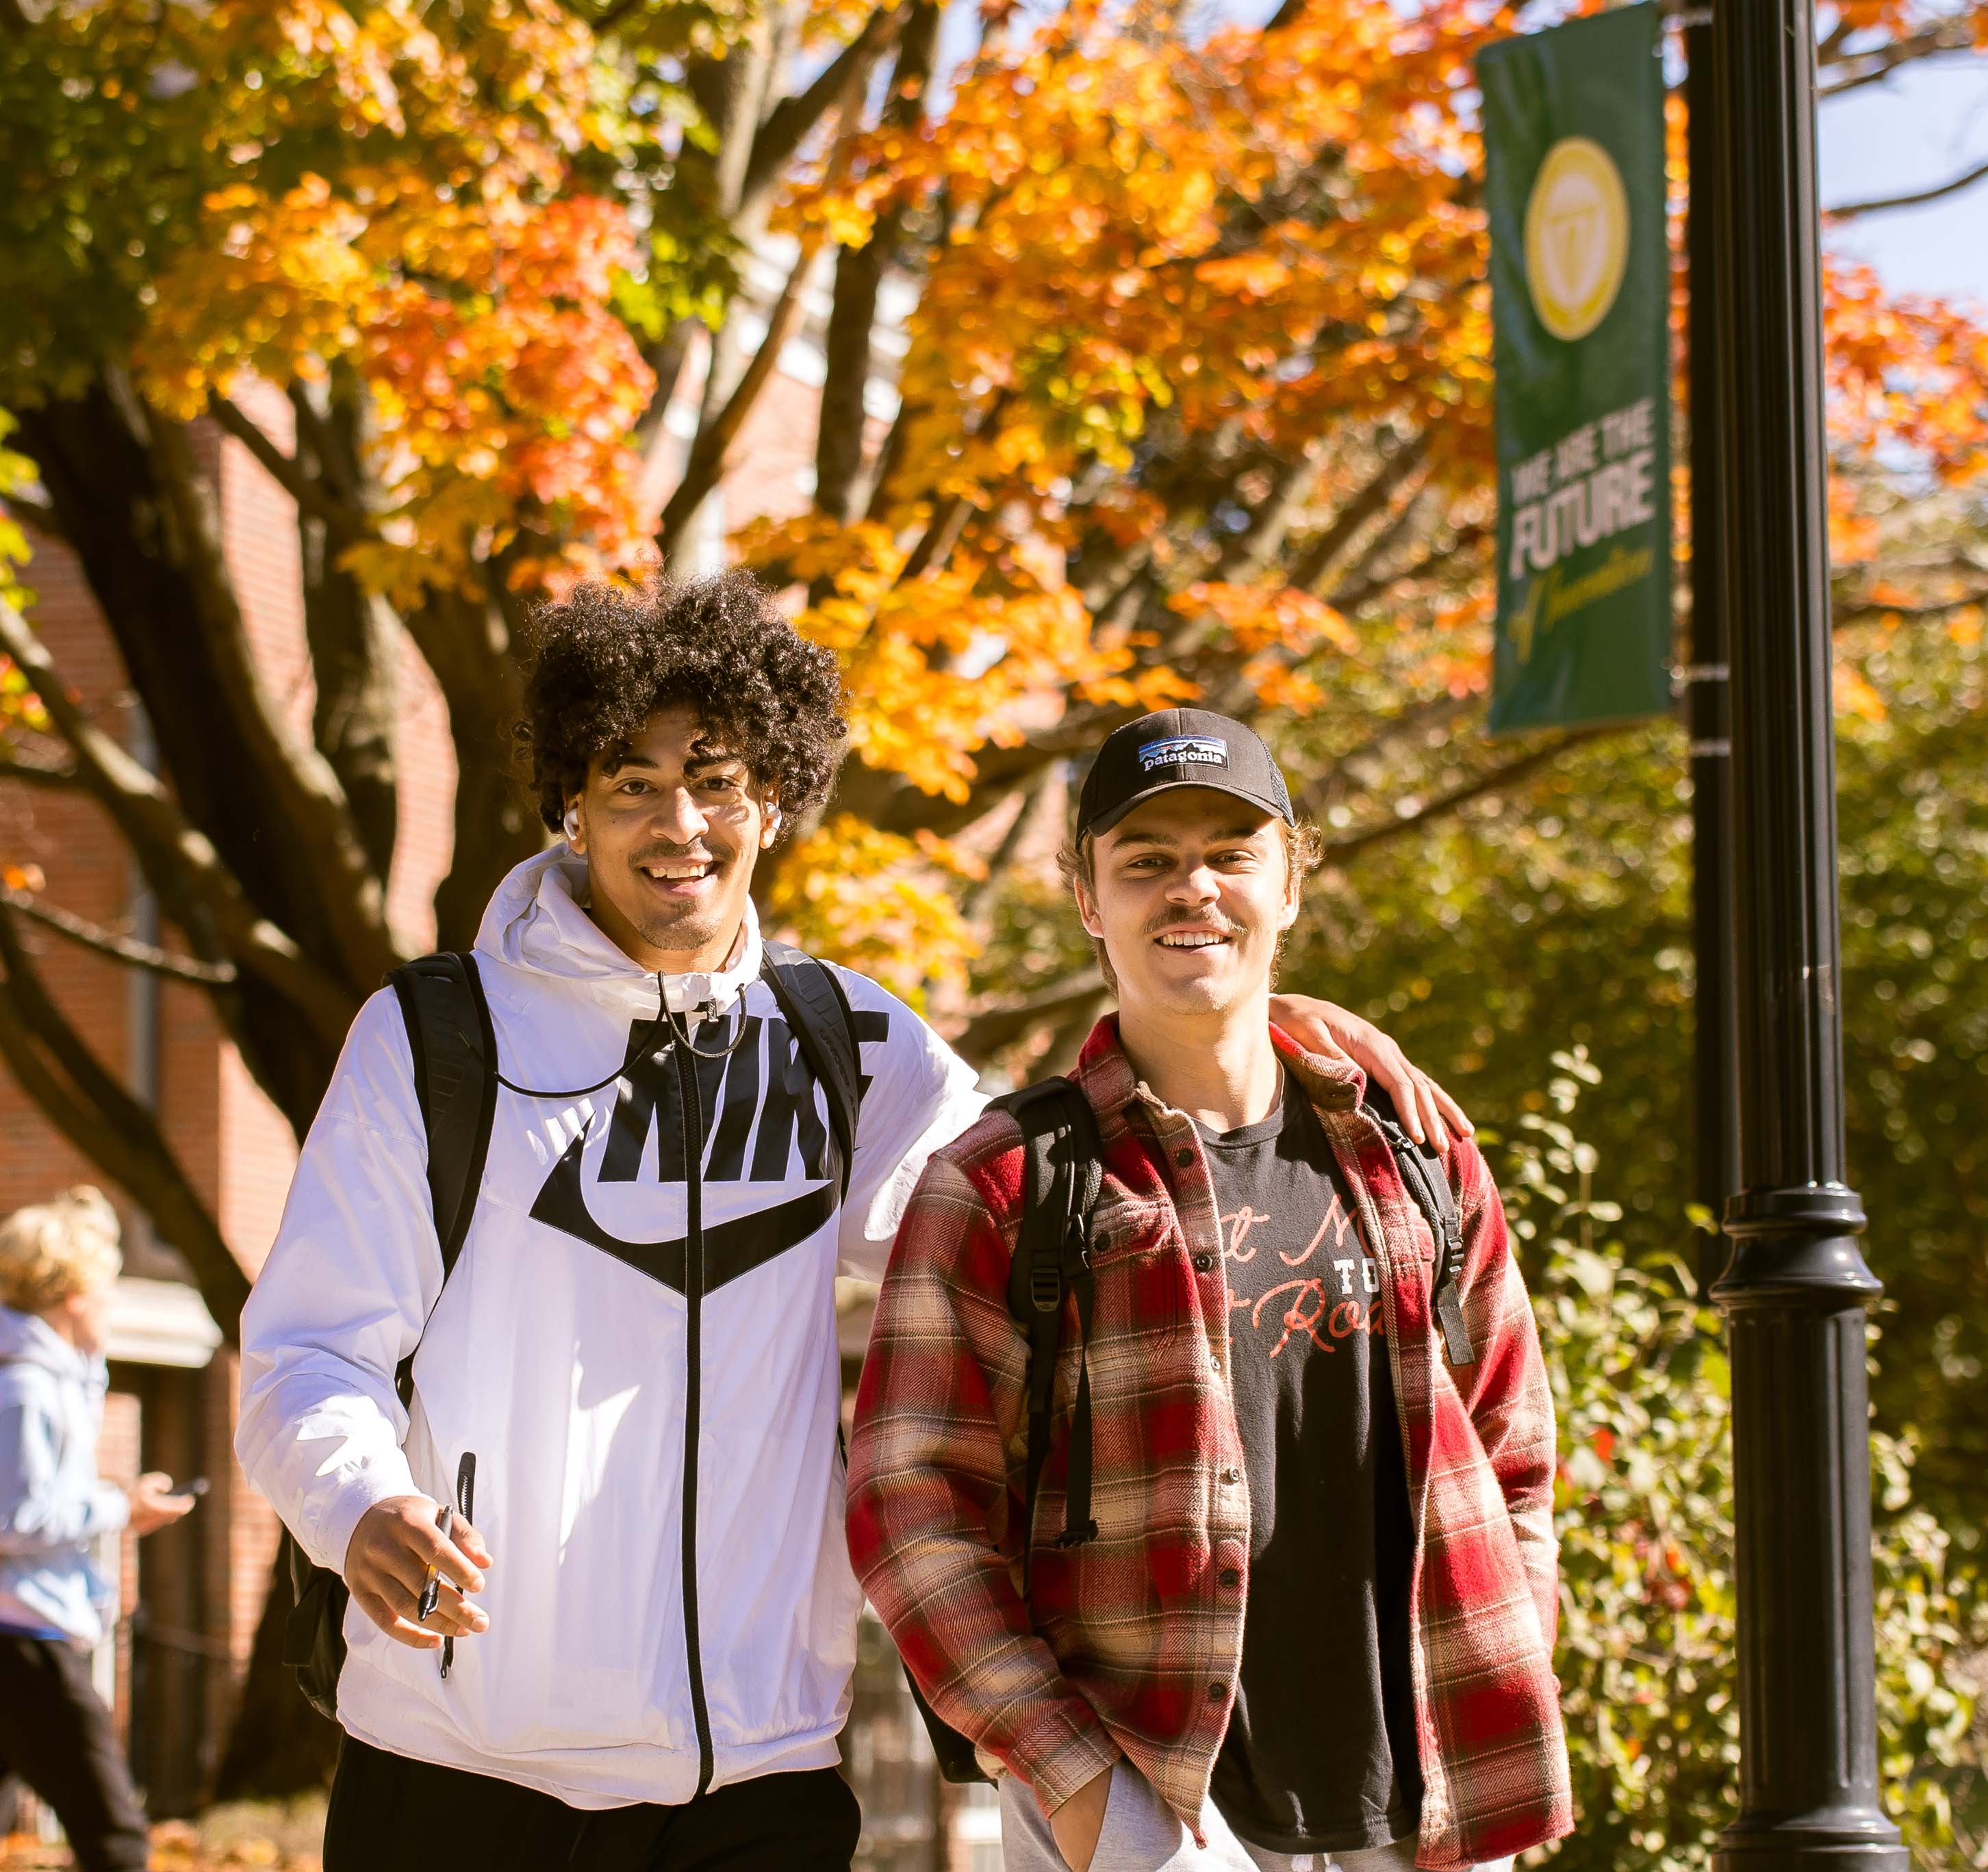 Students enjoying fall day on campus